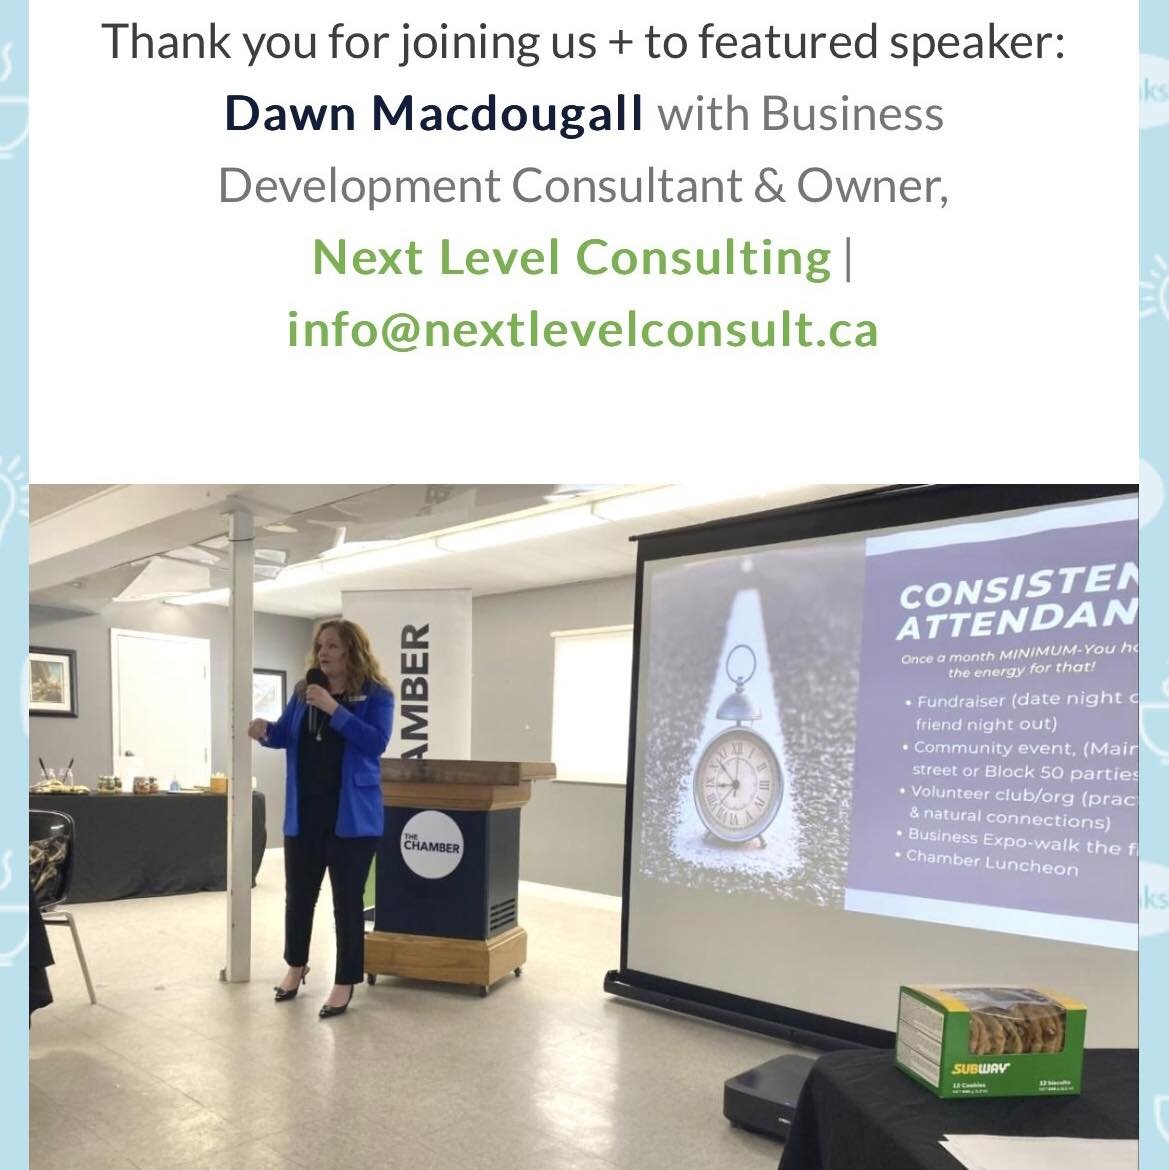 Last Friday I had the pleasure of speaking at the Devon Chamber February luncheon. We met at the Canadian Energy Museum and I talked about Networking at your NEXT LEVEL, authentically networking for connection not a transaction. 

If you our your tea